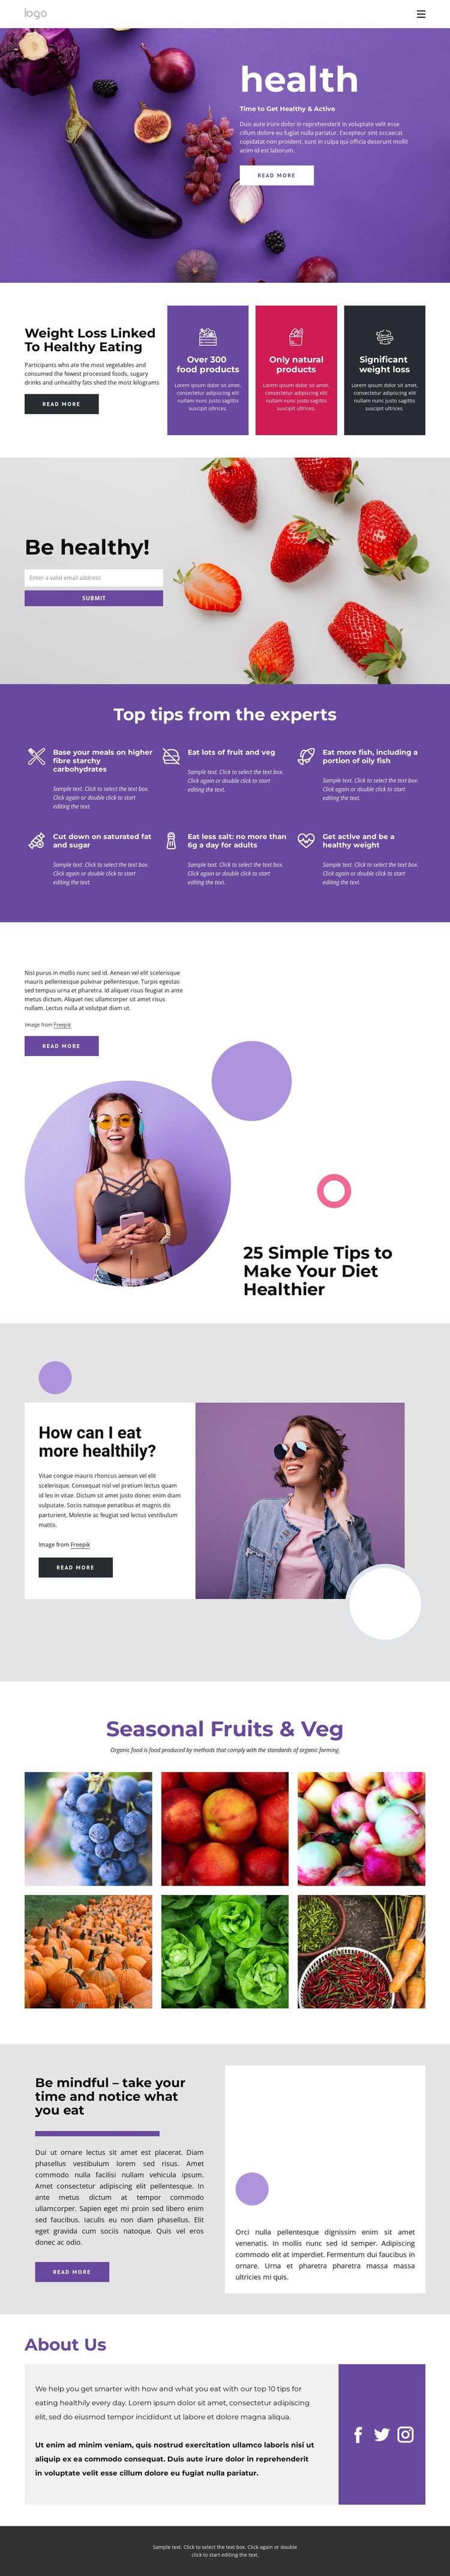 Building a healthy and balanced diet Web Design